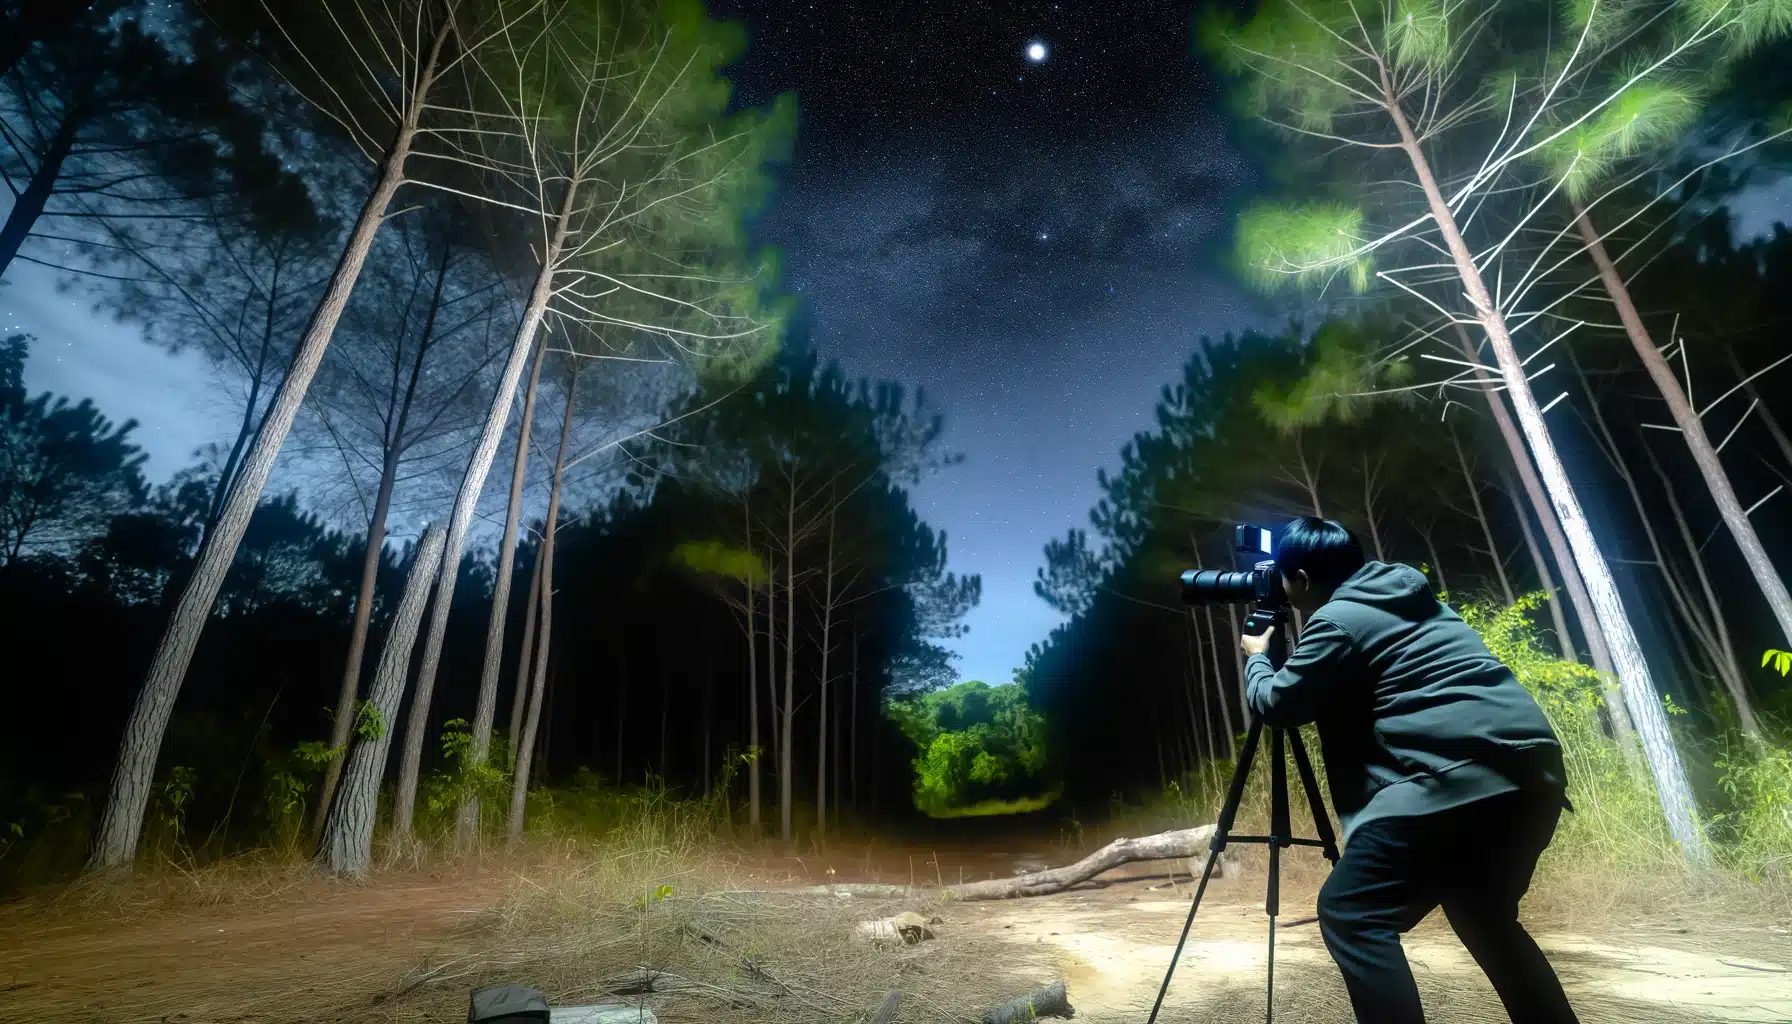 Photographer using a tripod-mounted camera to capture the starry night sky in a dense forest, demonstrating the integration of nature and cosmology.